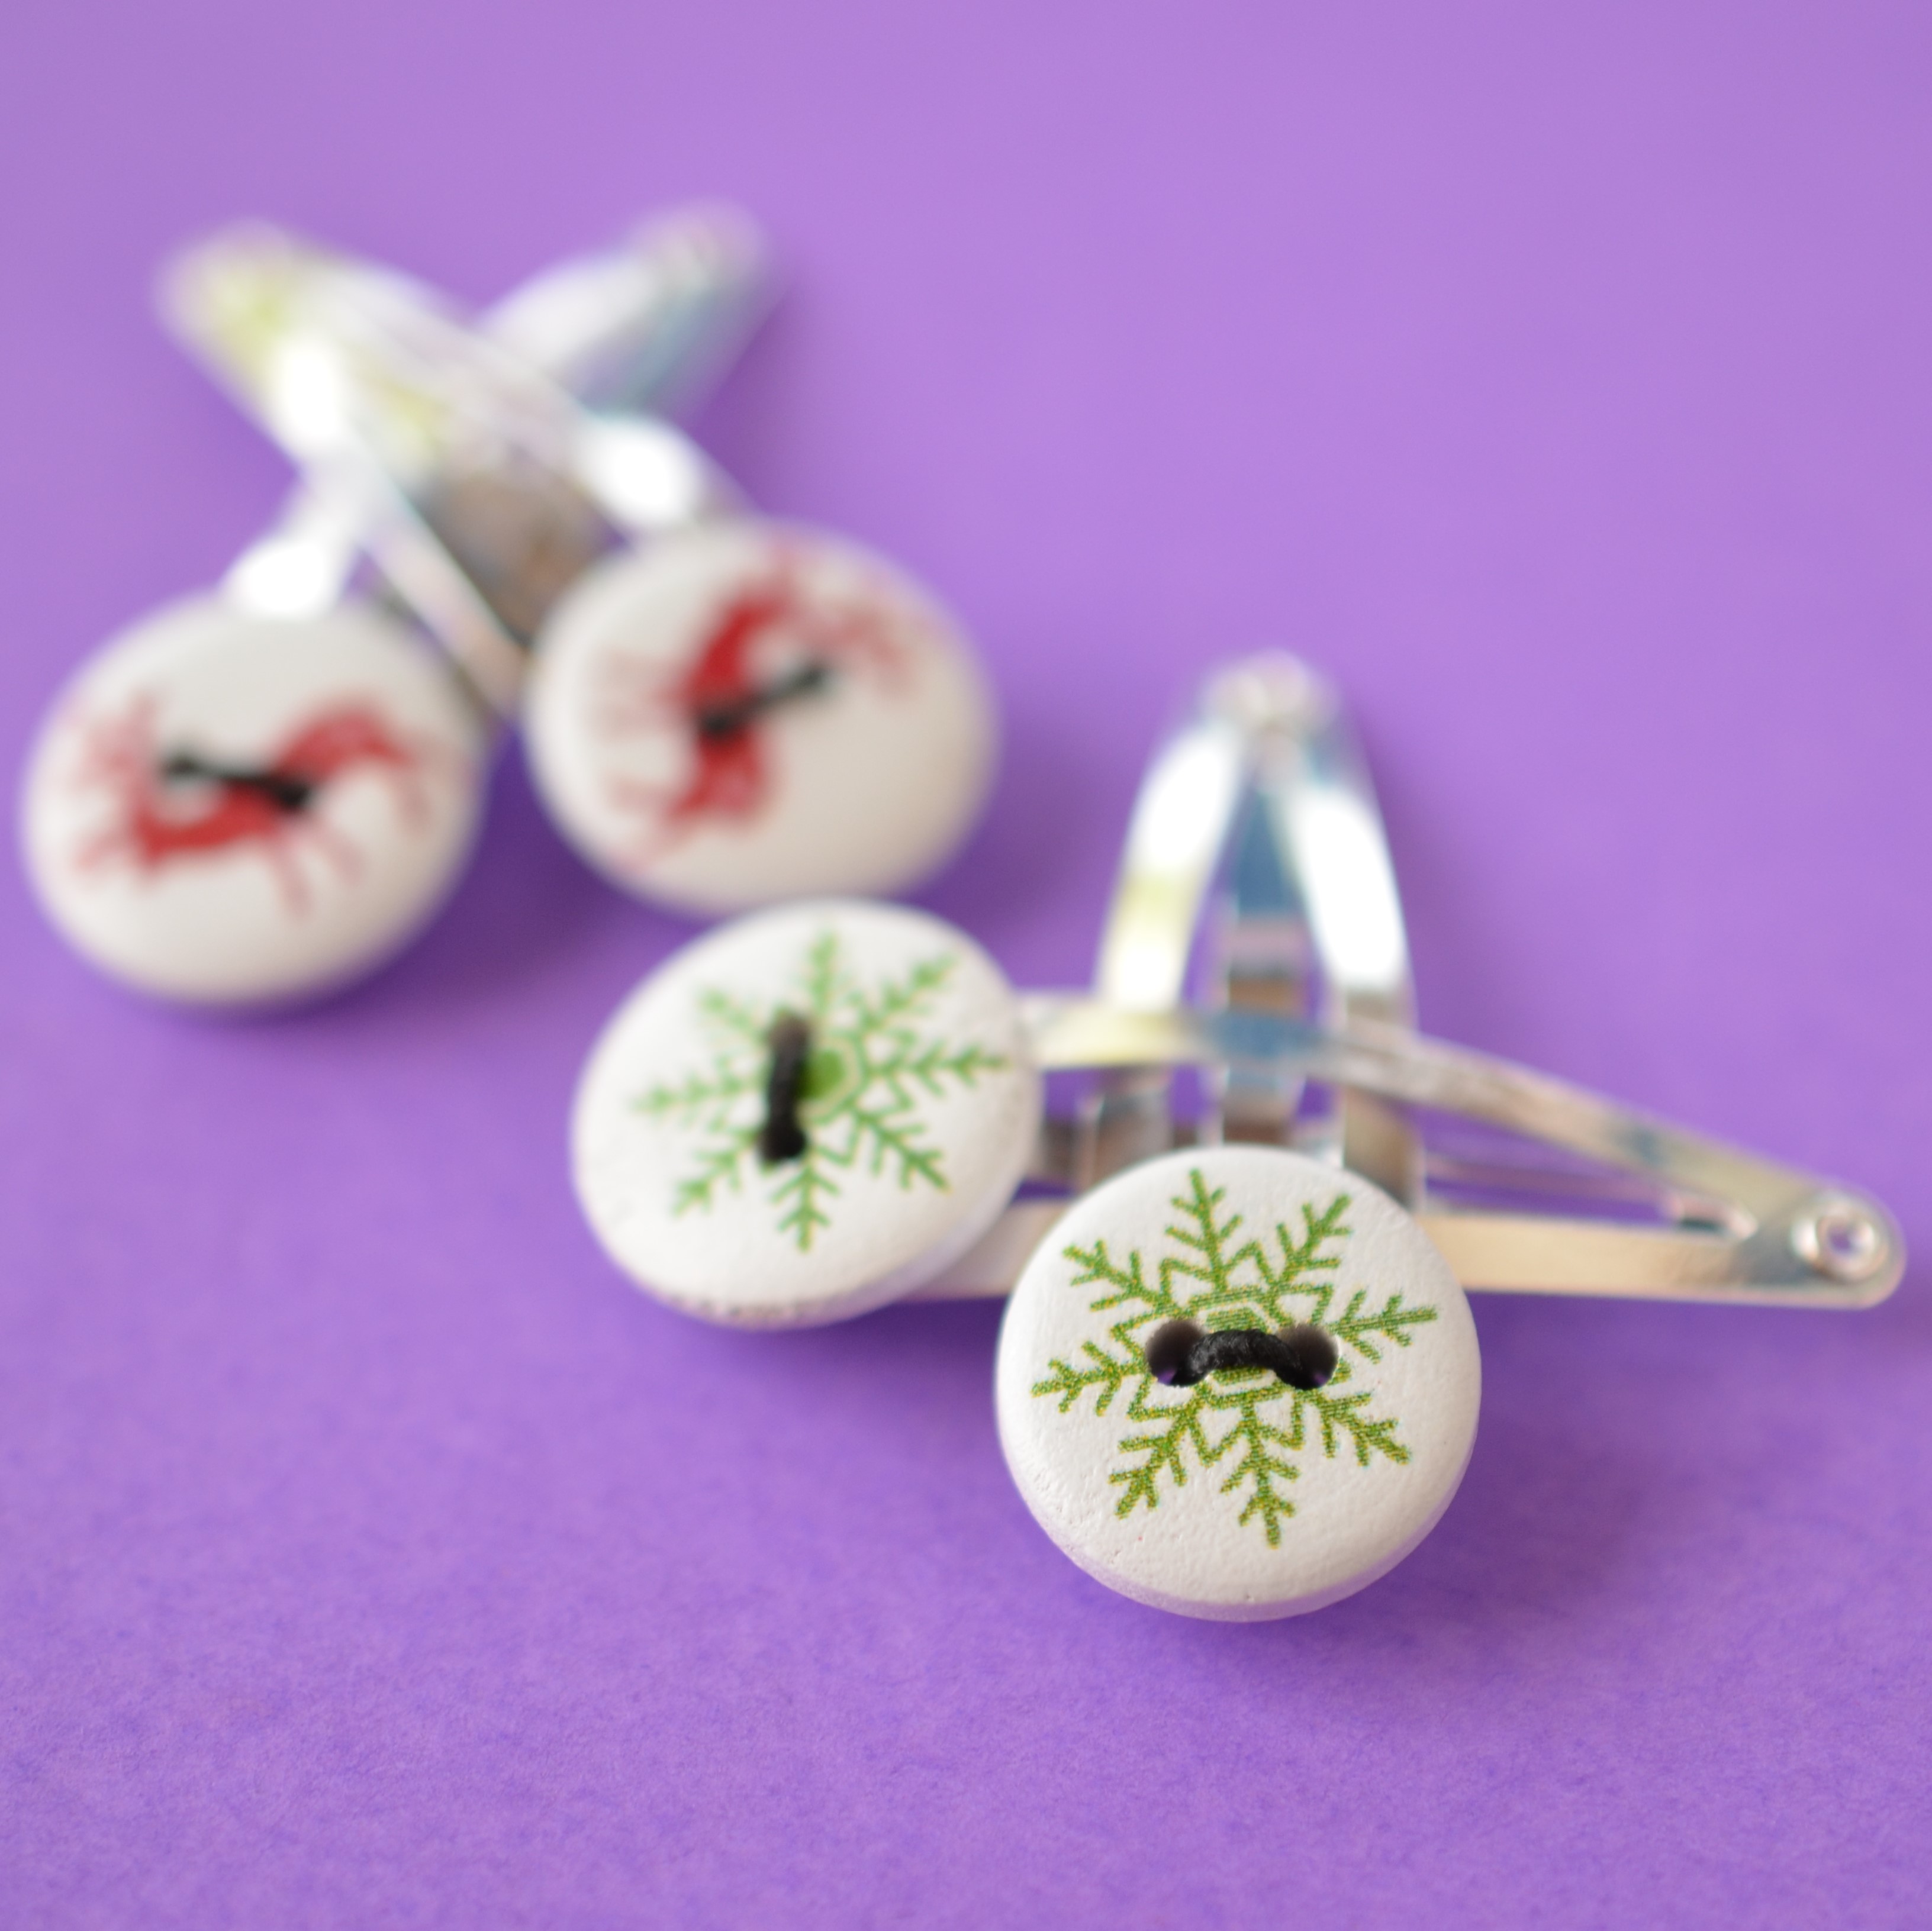 Two Pairs of Christmas Button Hair Clips with Reindeer and Green Snowflake design